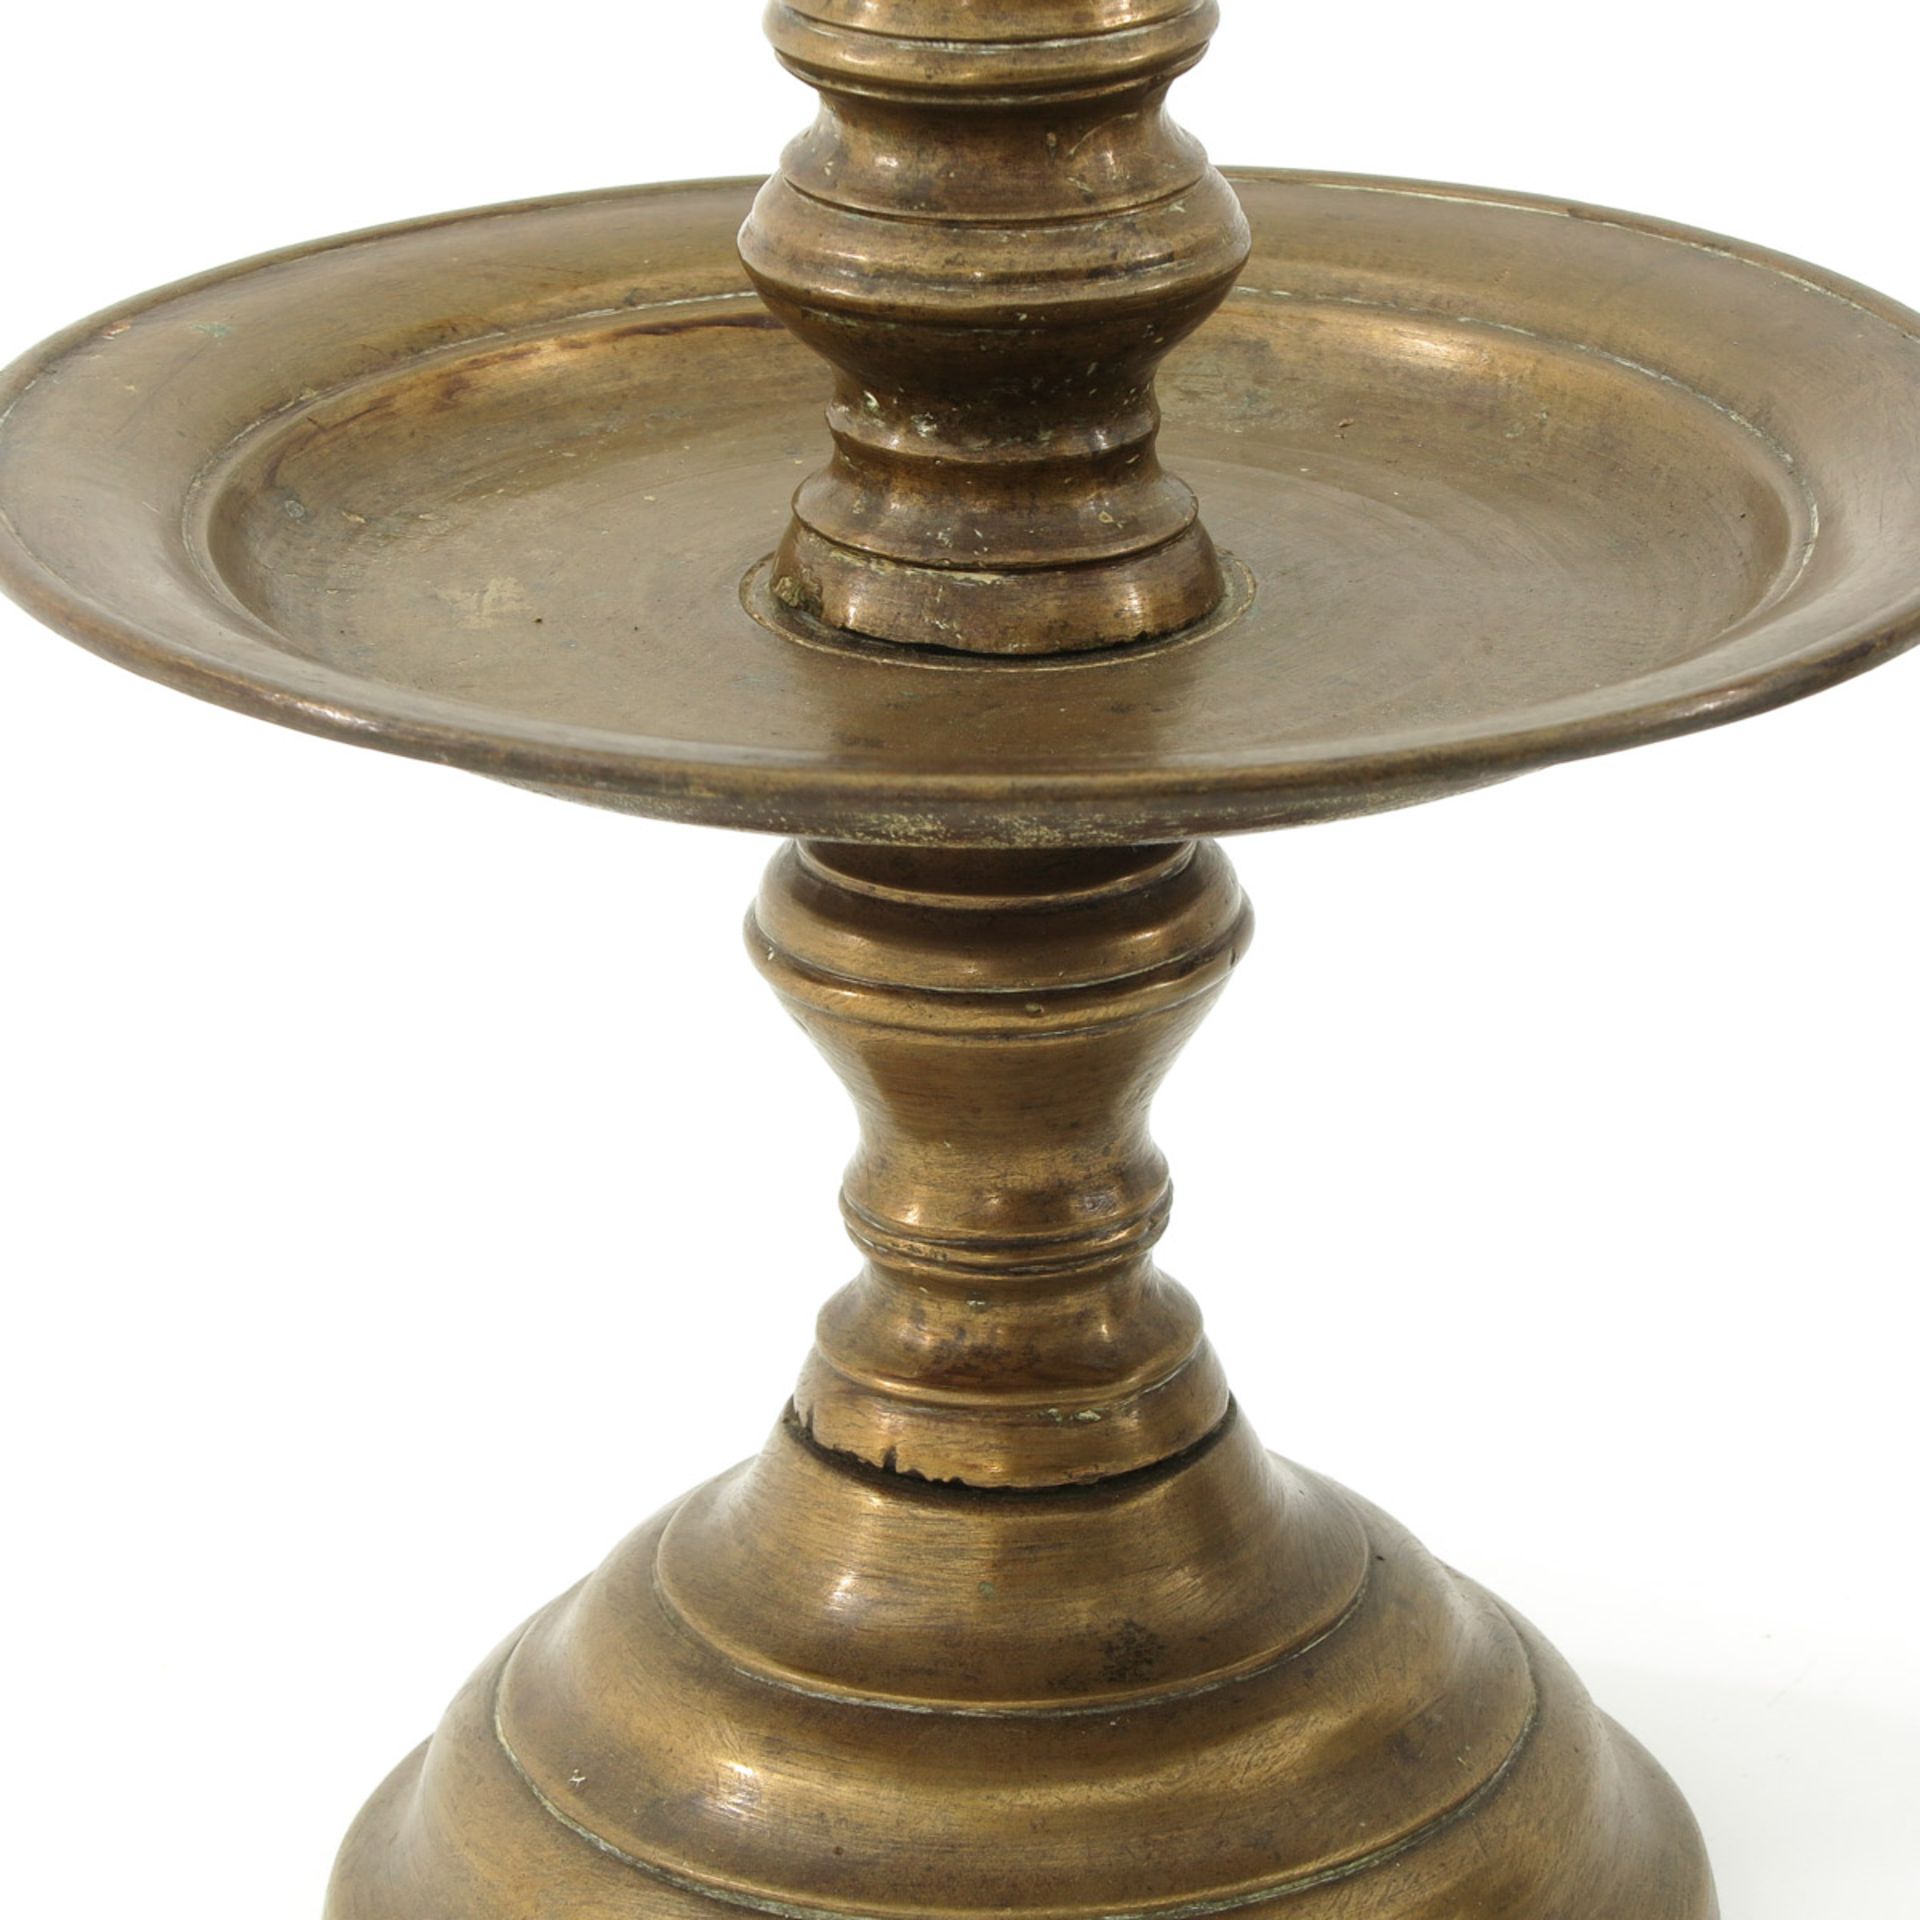 A Pair of Antique Brass Candlesticks - Image 7 of 7